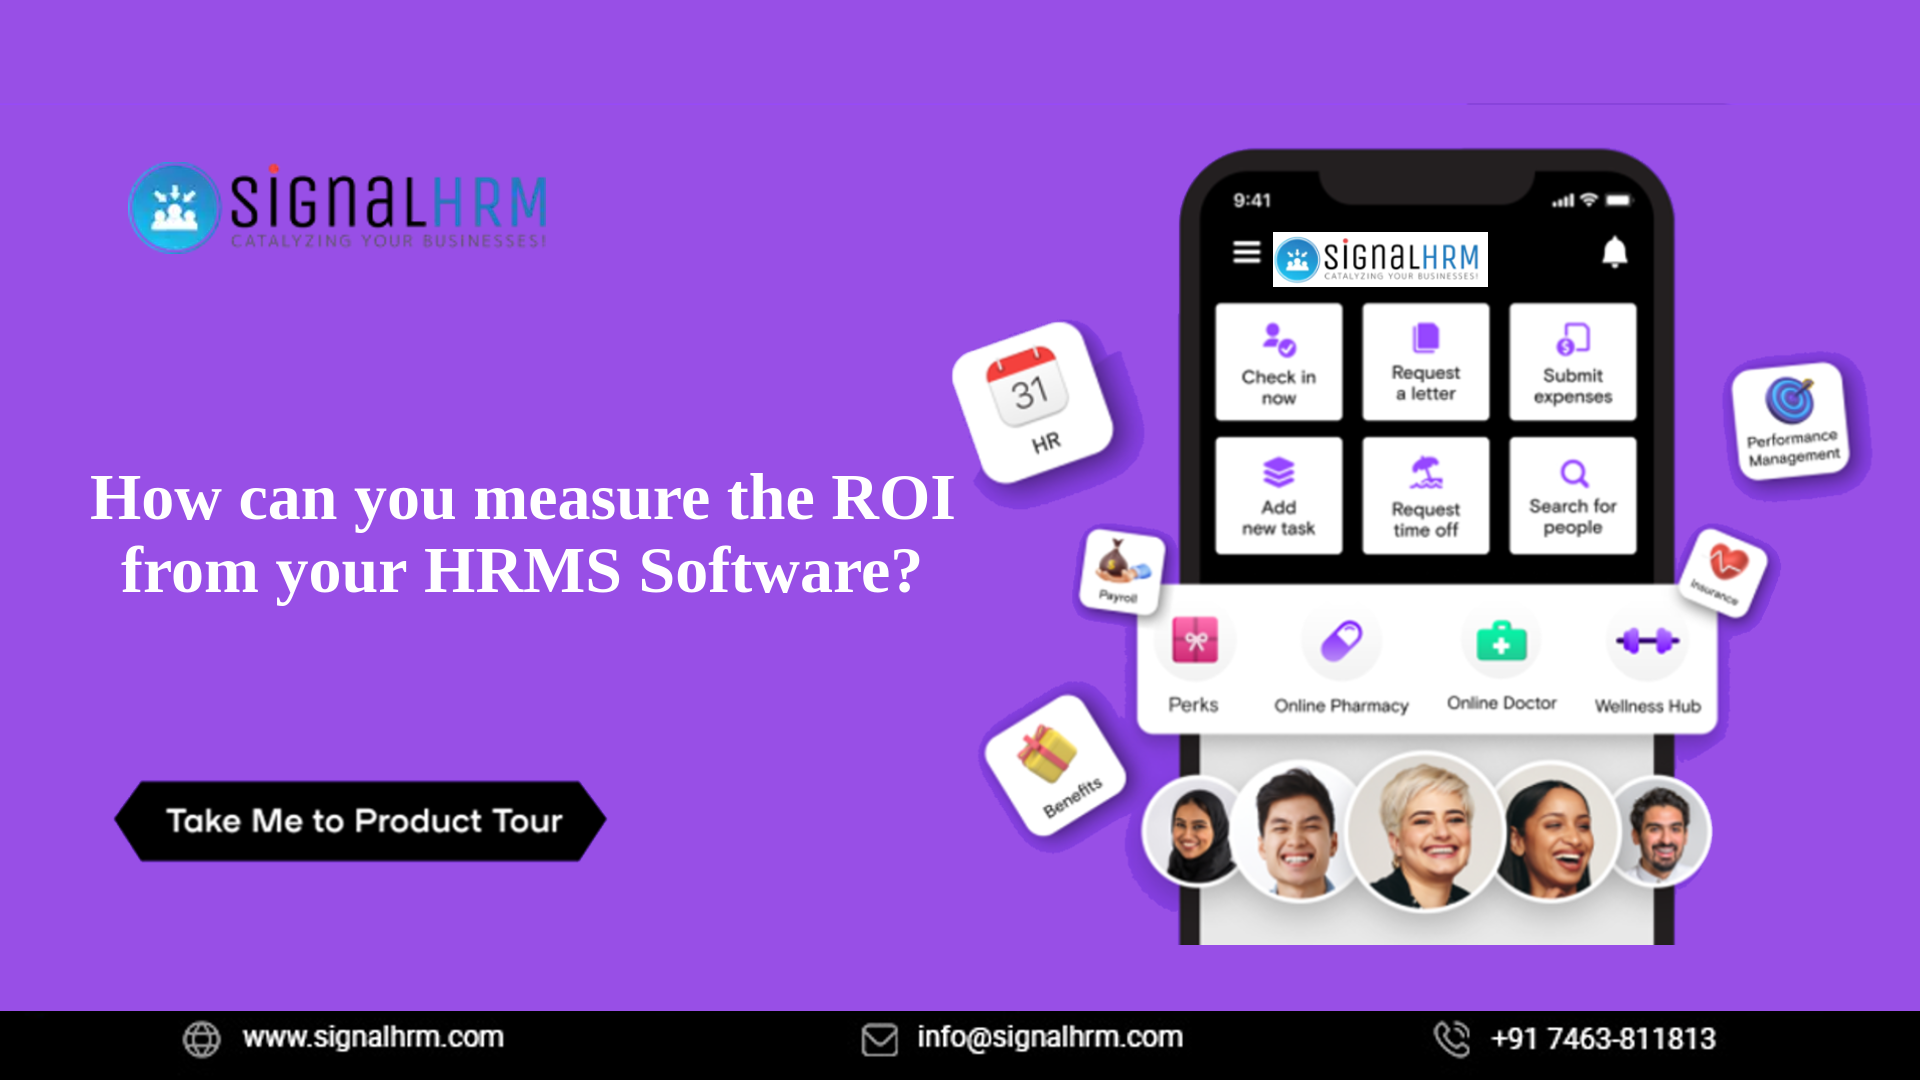 How can you measure the ROI from your HRMS Software?